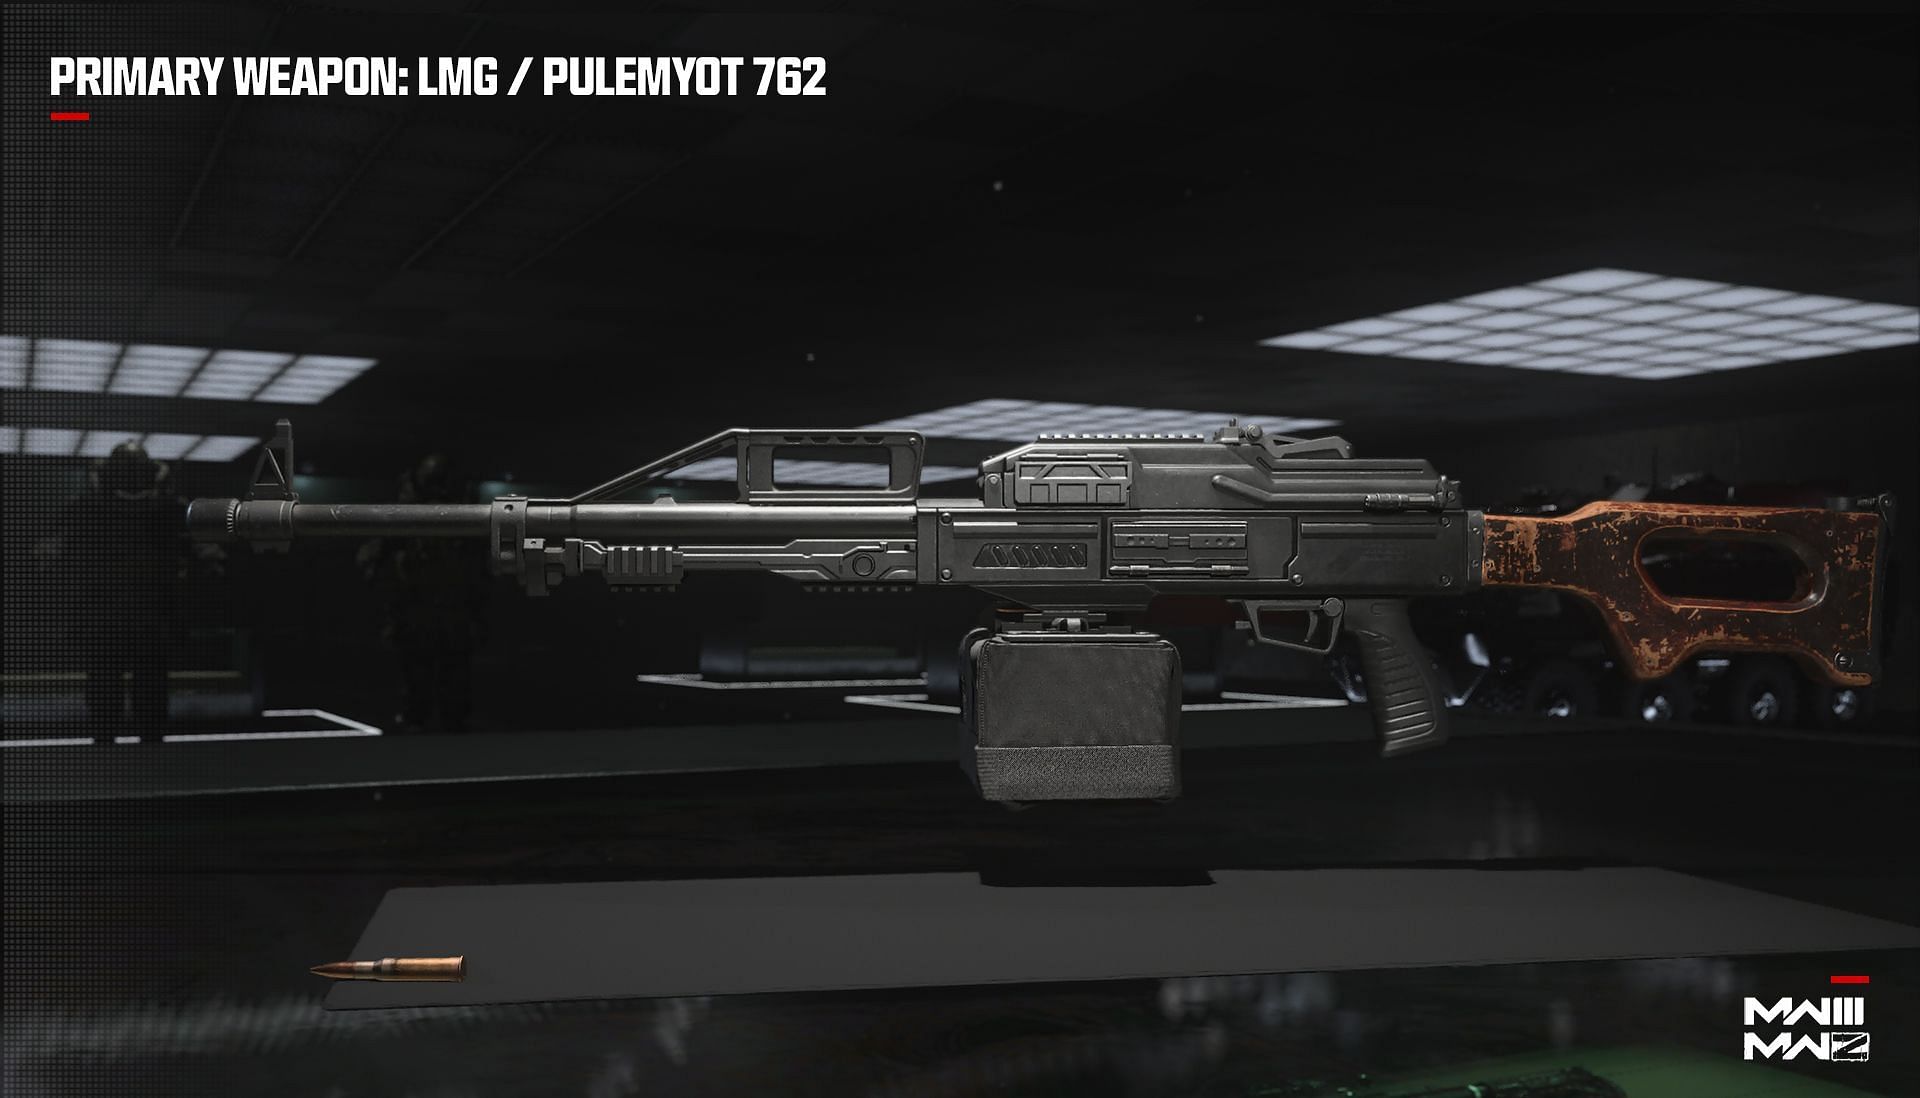 Pulemyot LMG in MW3 (Image via Activision)